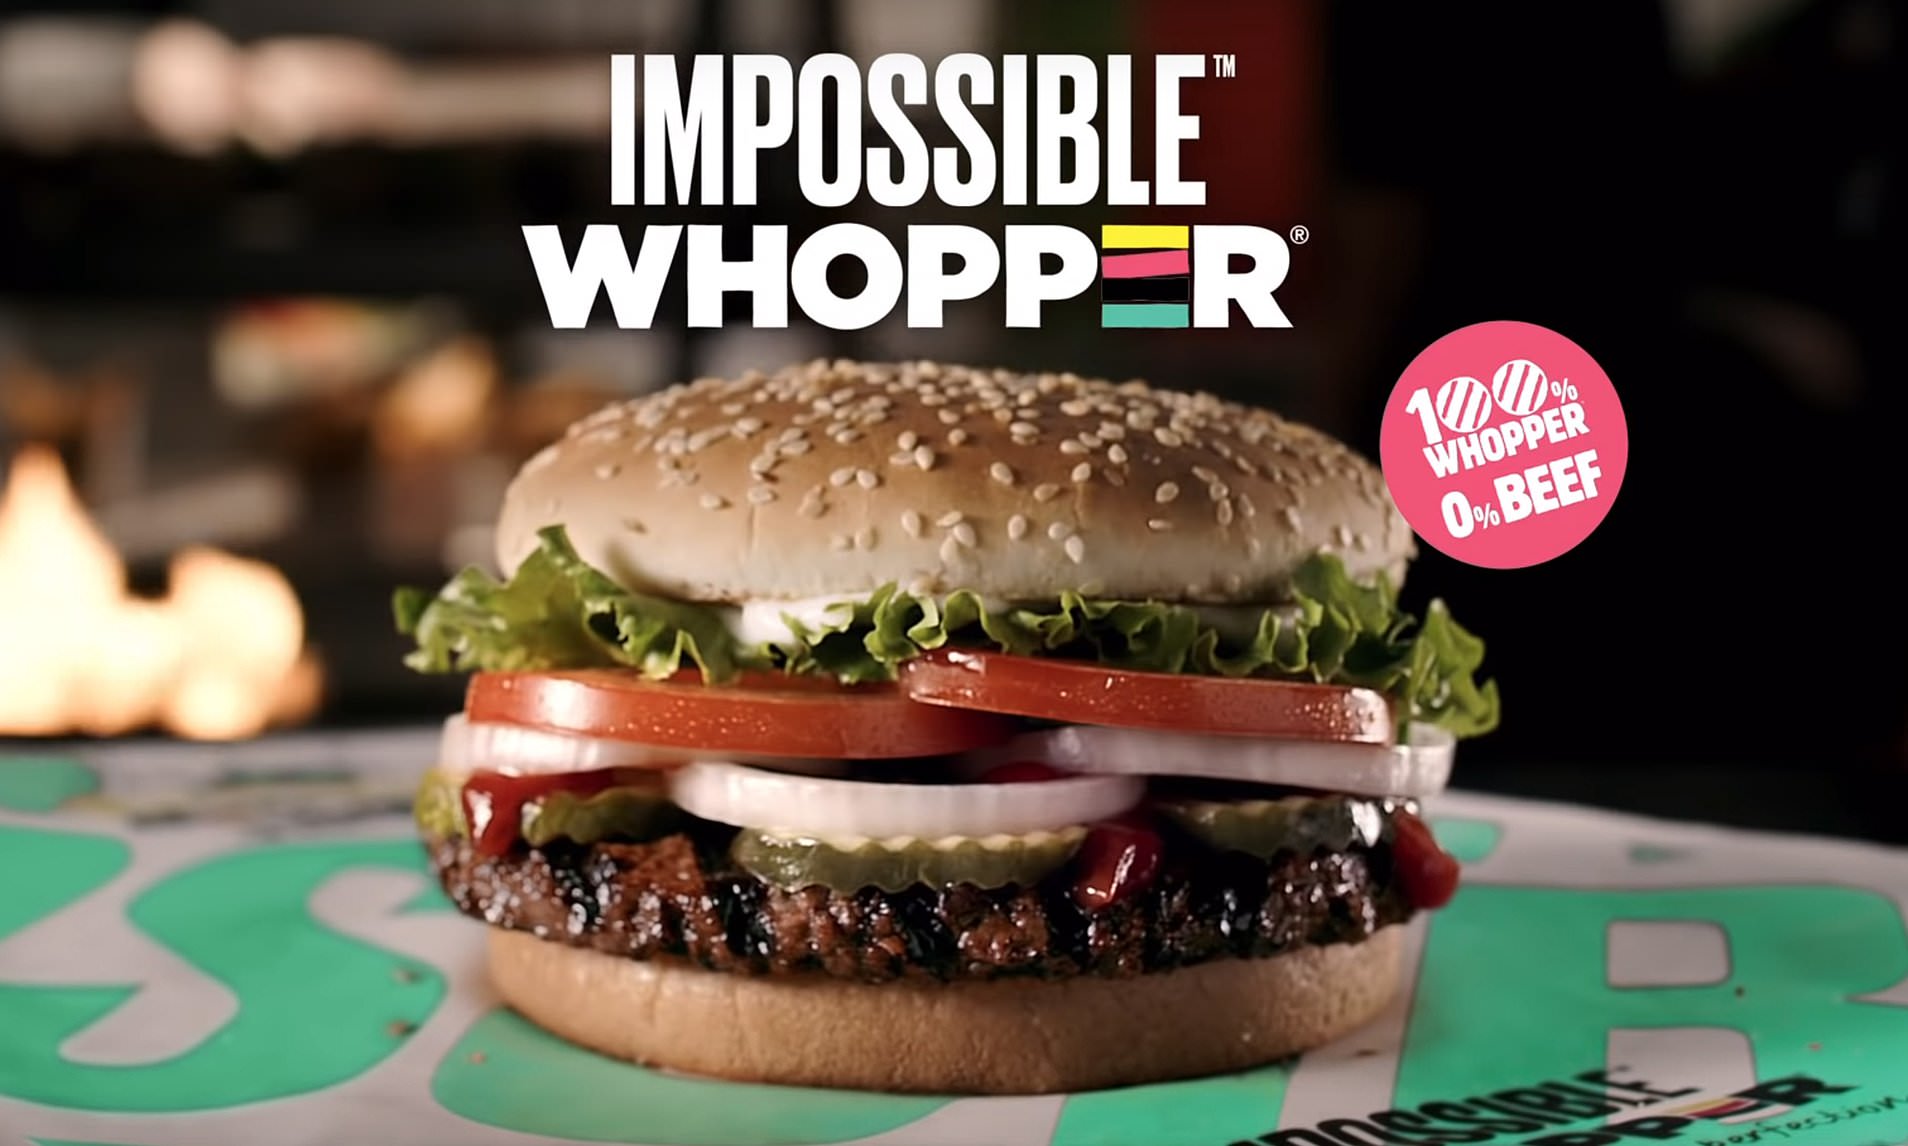 burger king impossible whopper